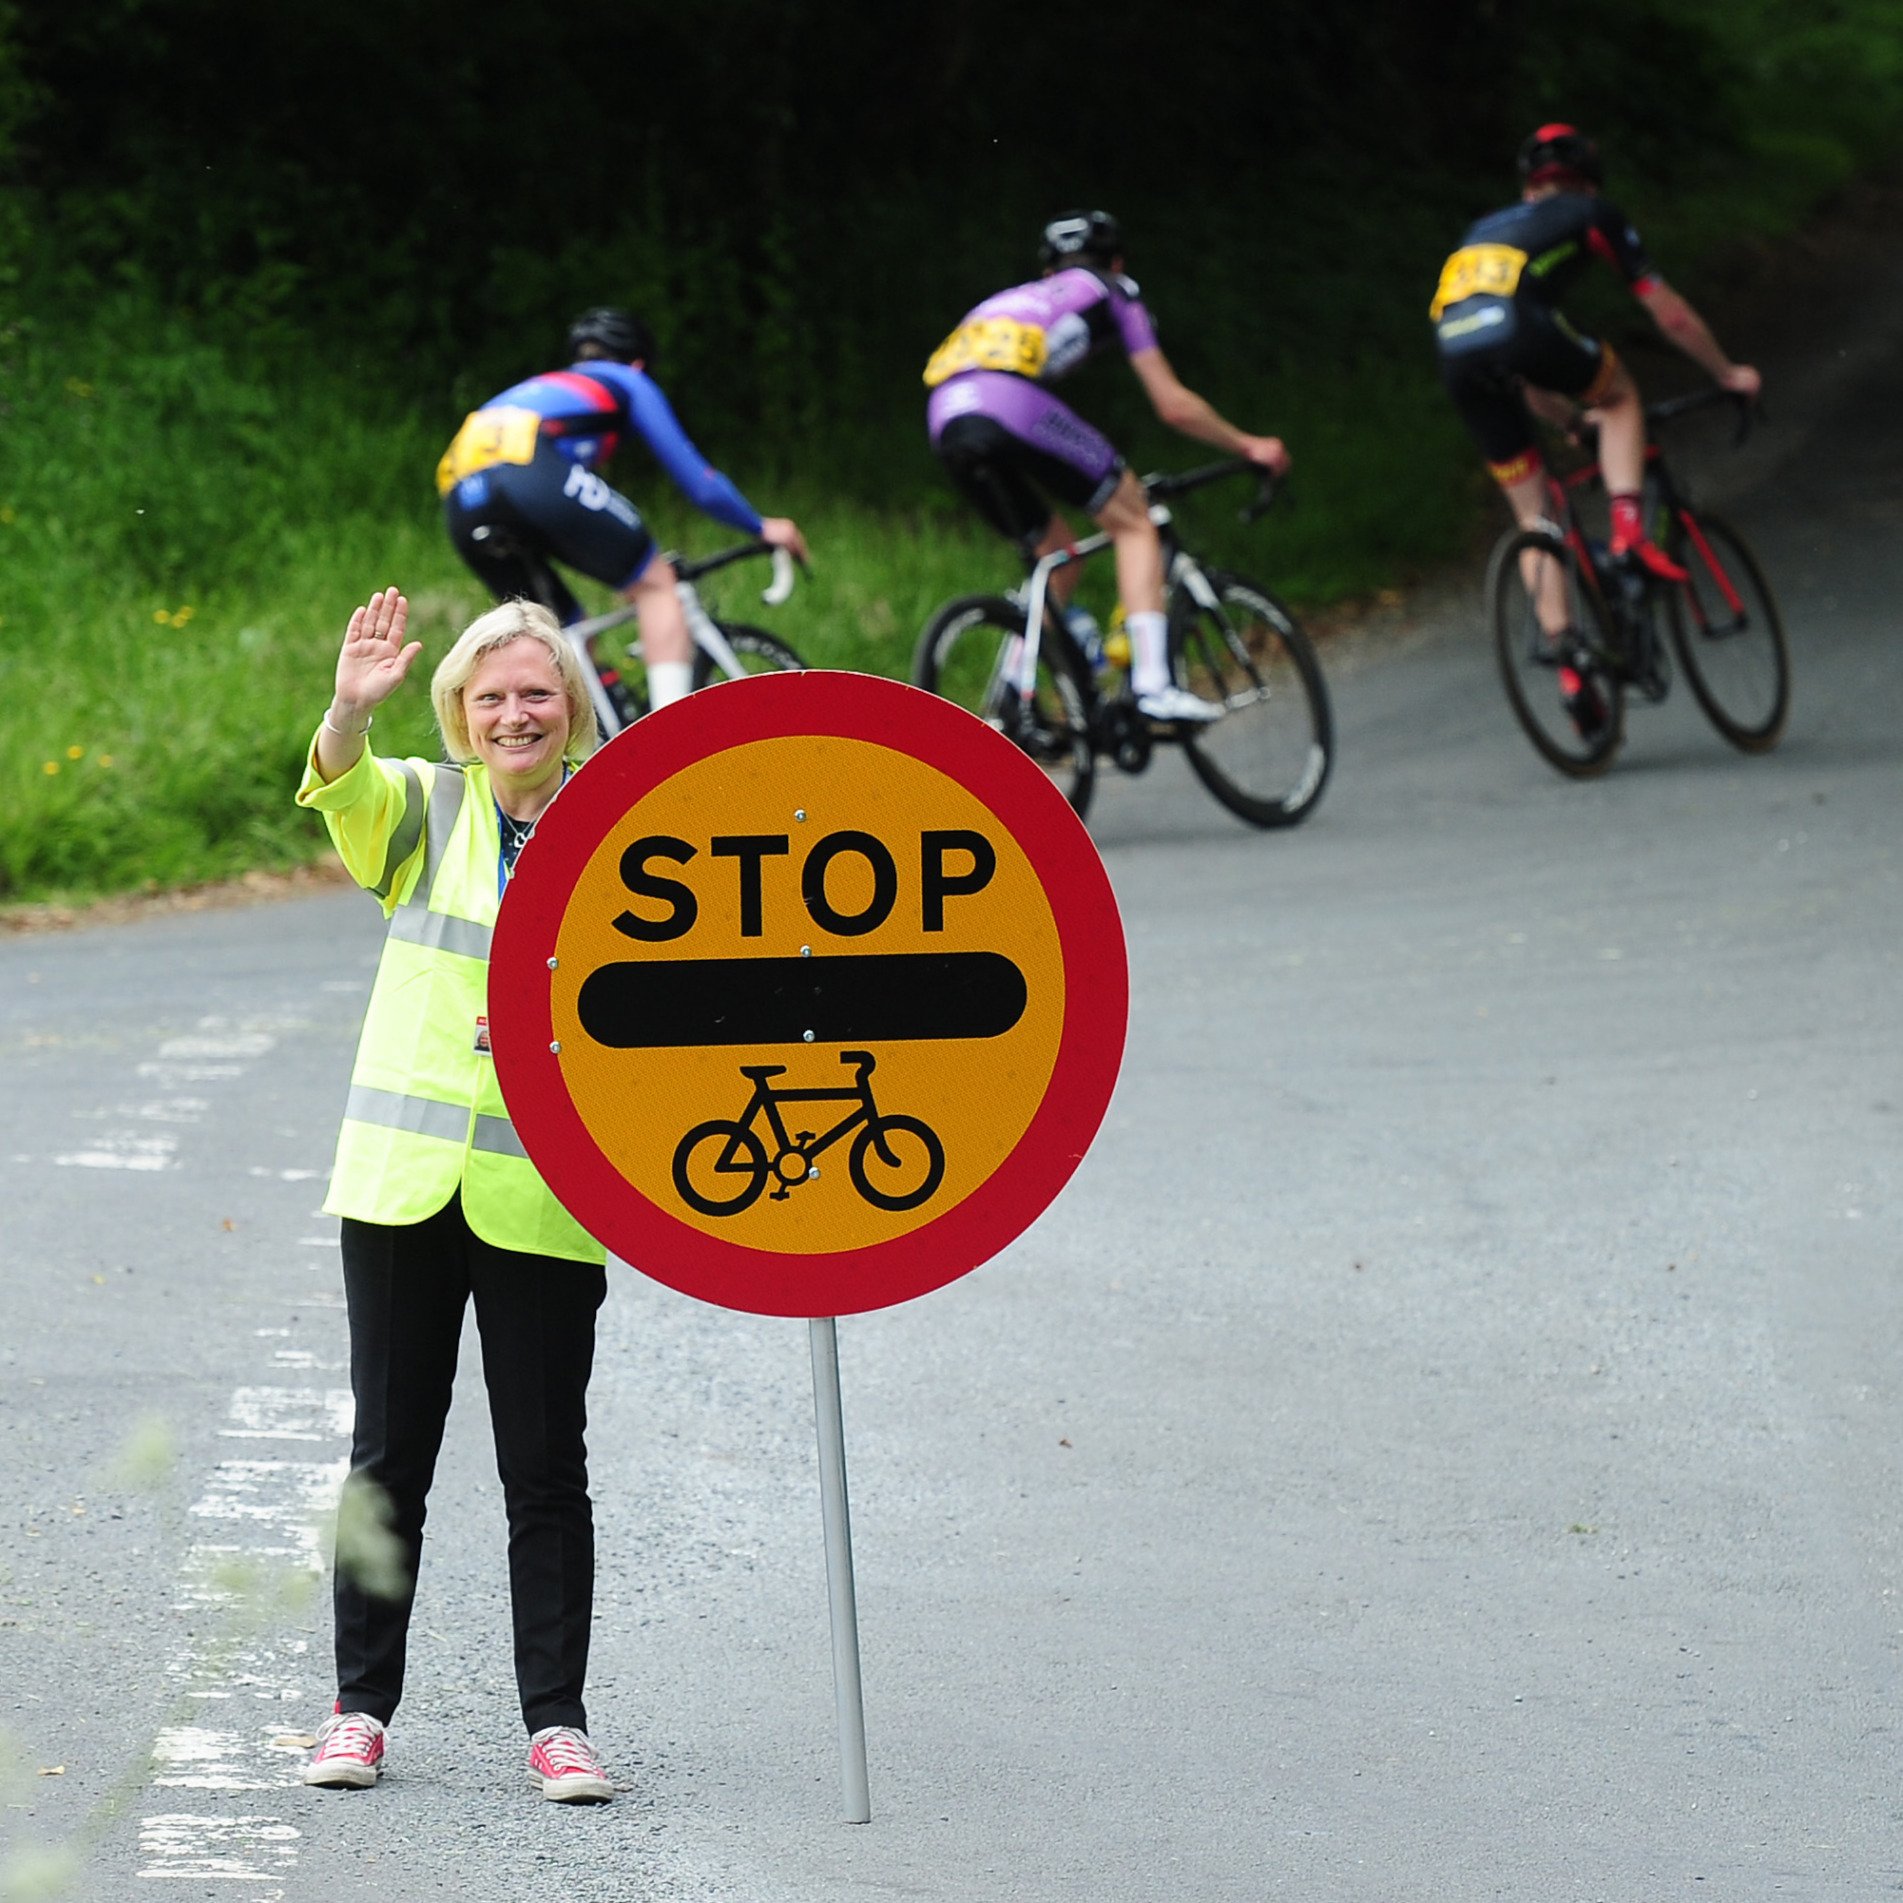 Accredited Marshal stopping traffic during cycling race